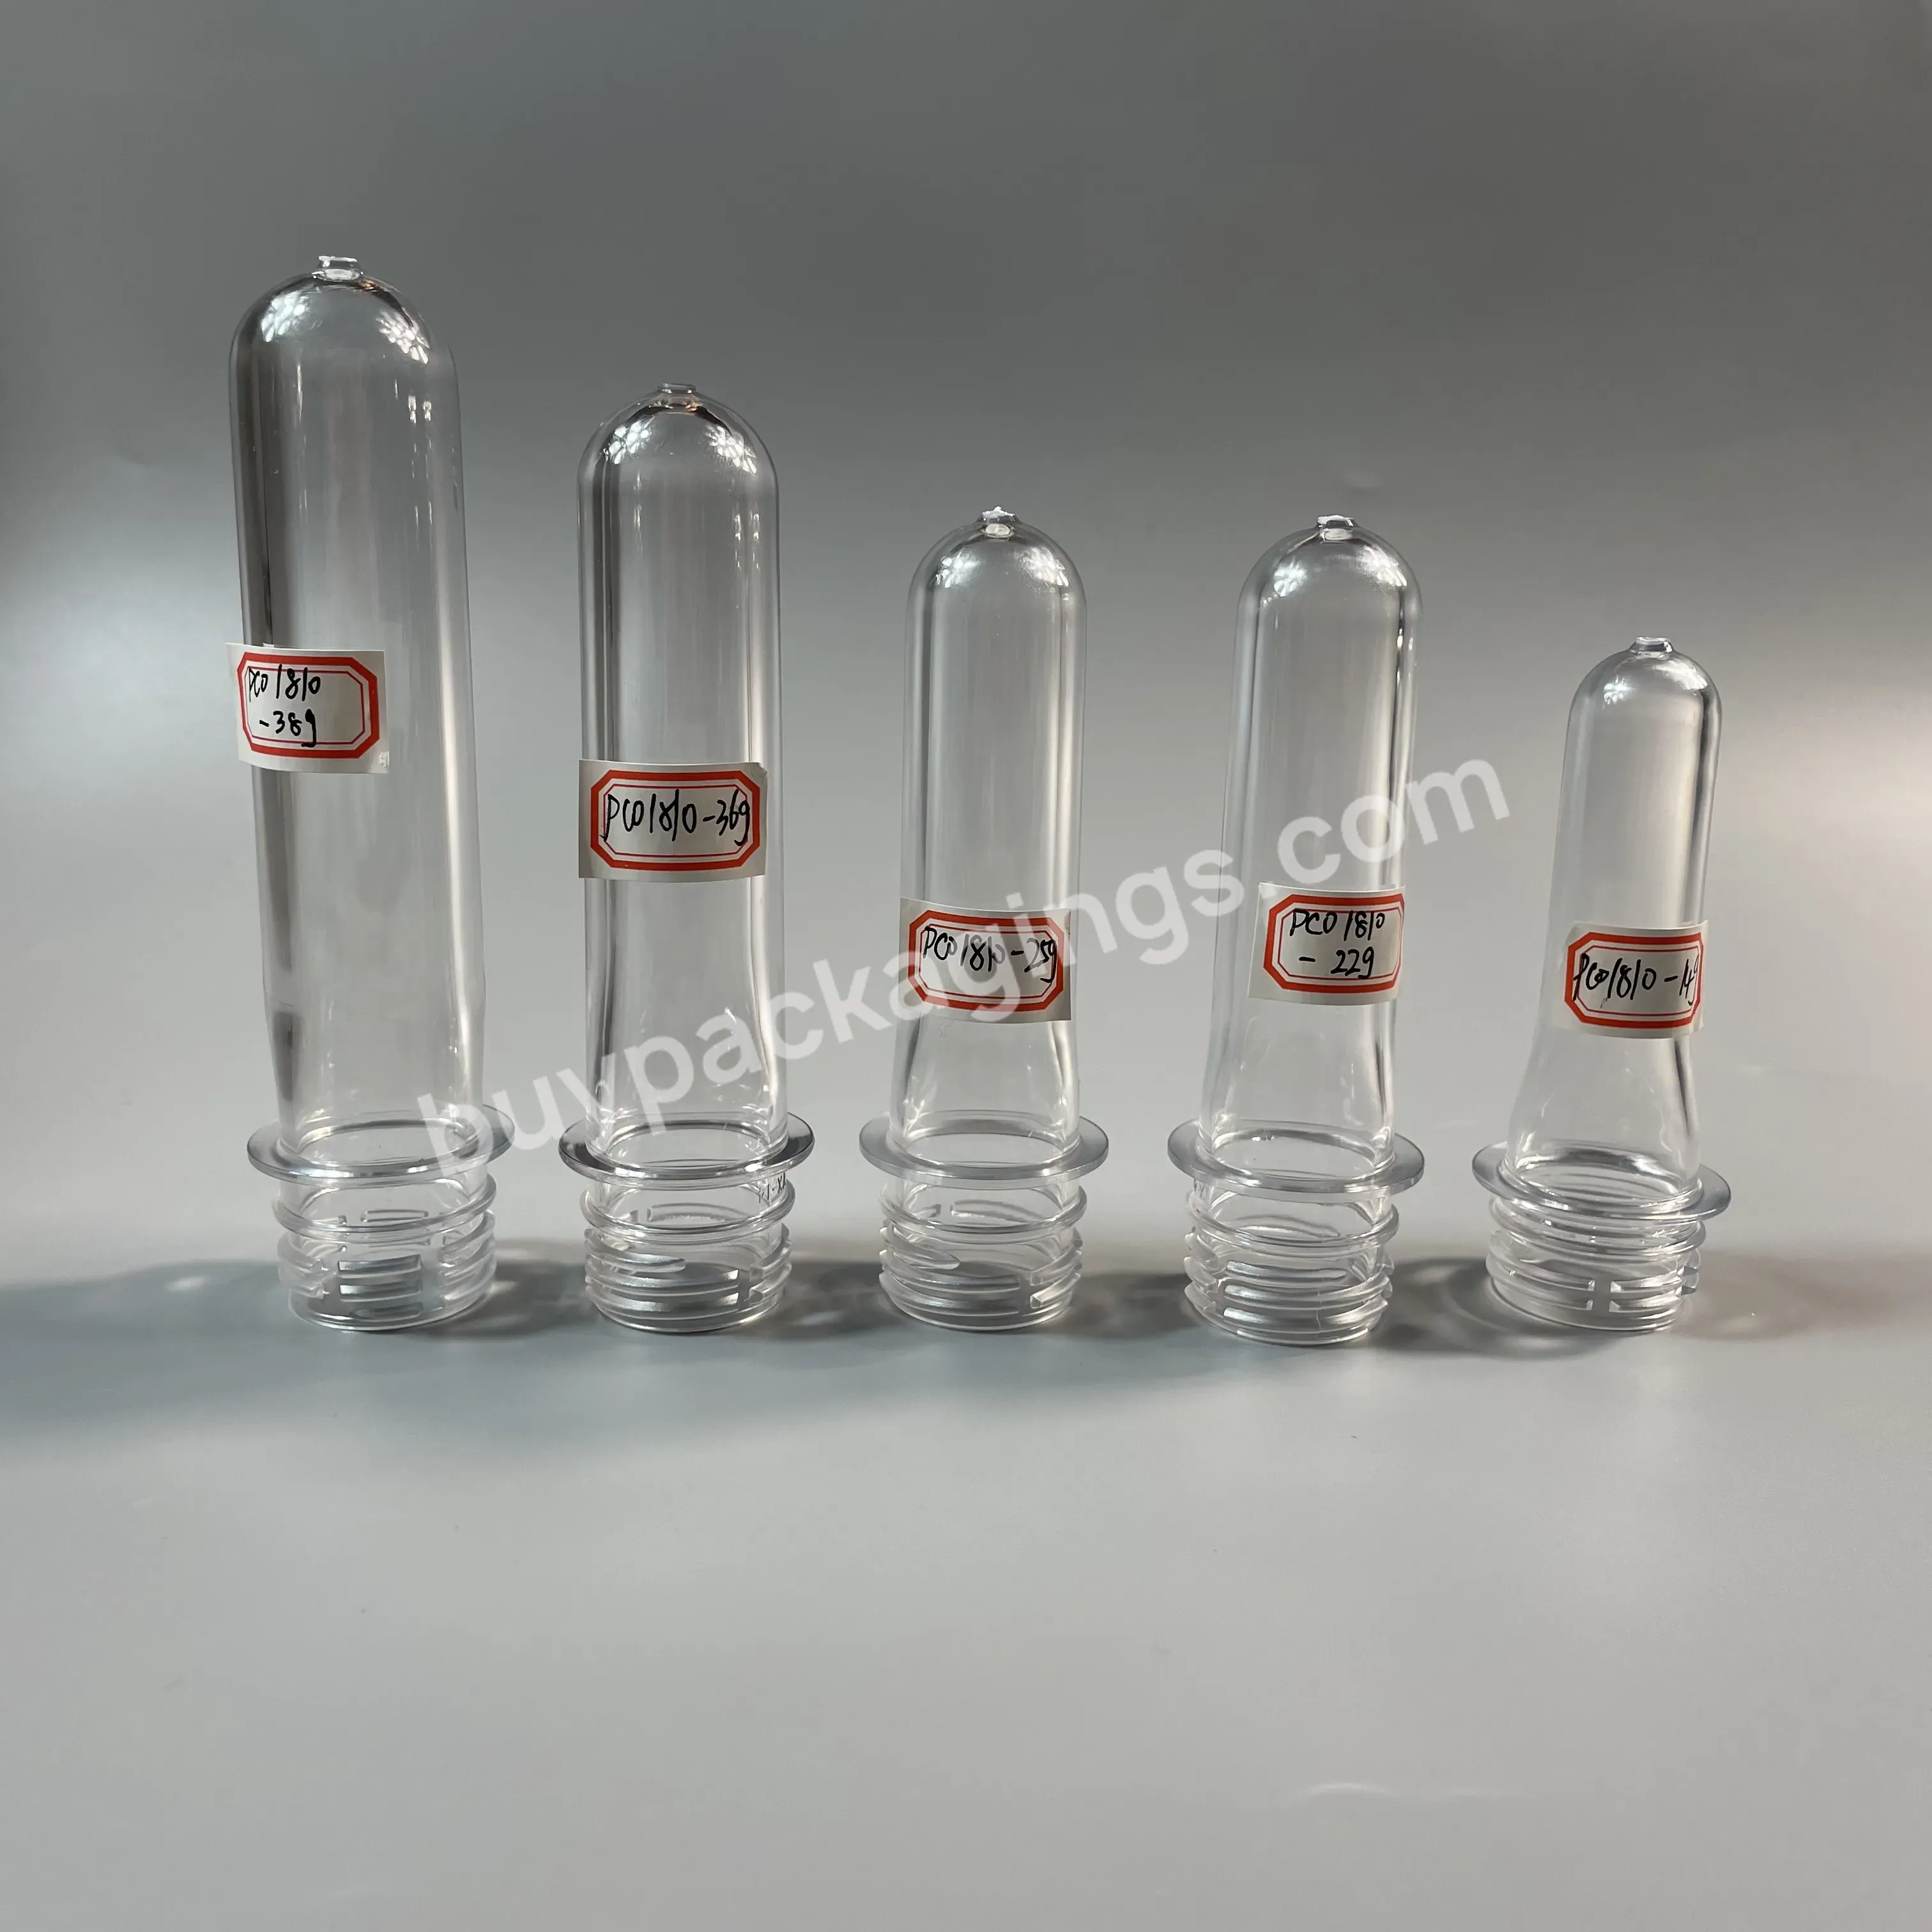 Preform Pco 1810 14g 22g 25g 36g 38g Preforms Water Bottle Raw Material Pet Preform 500ml For Water